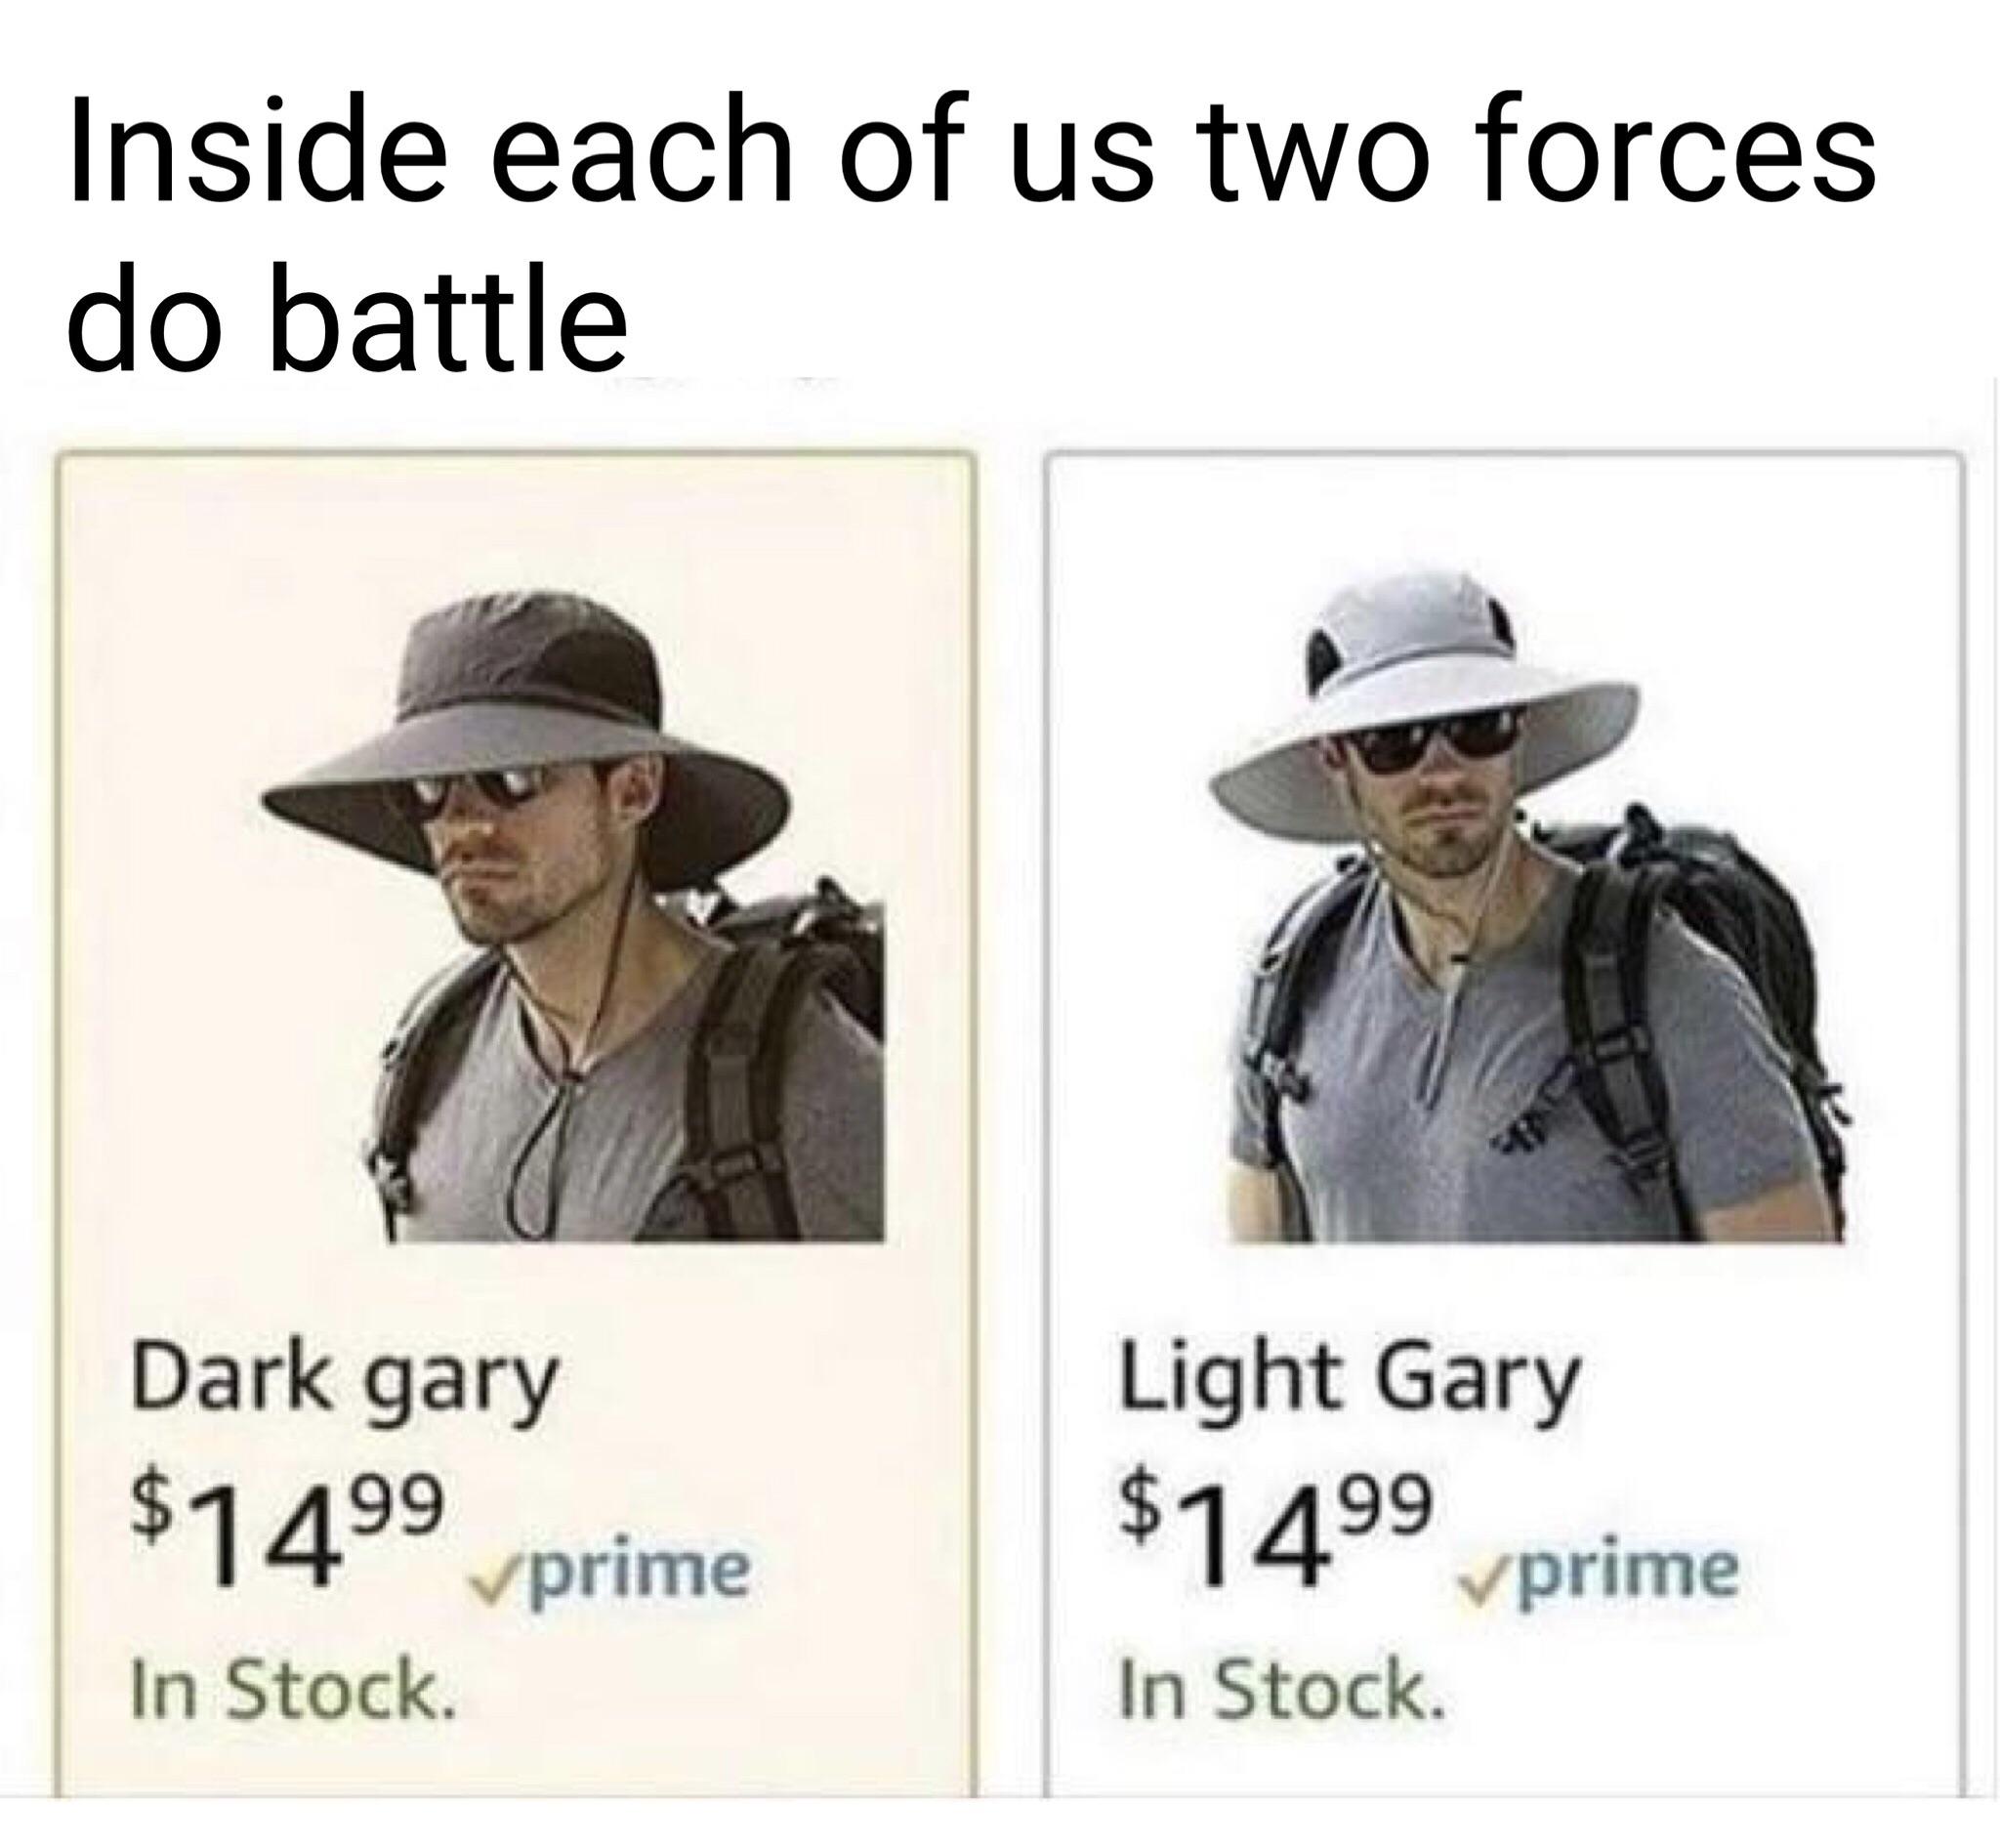 inside you there are two garys - Inside each of us two forces do battle Dark gary $1499 prime Light Gary 99 In Stock In Stock